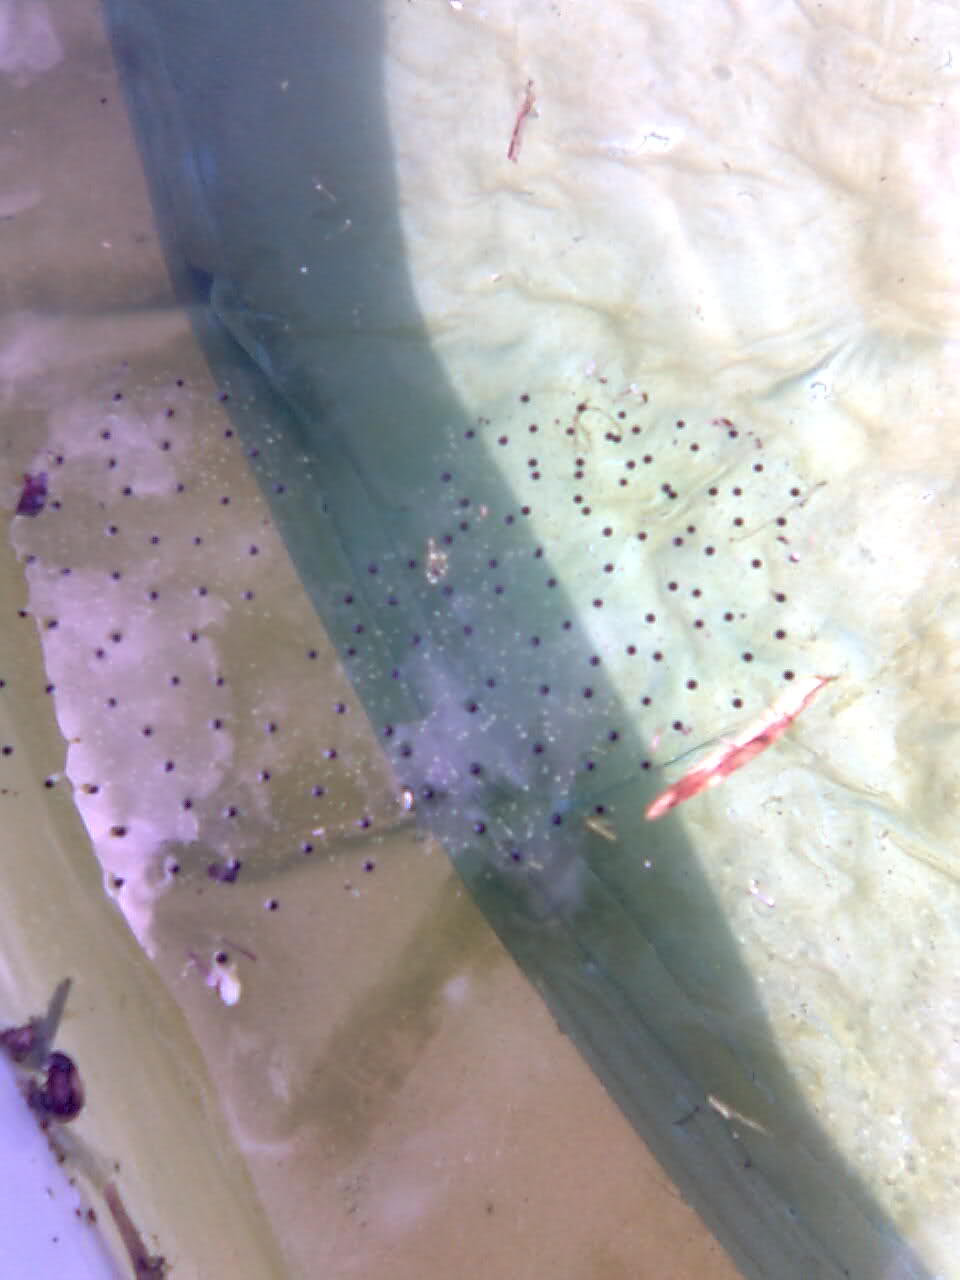 Are these frog eggs?